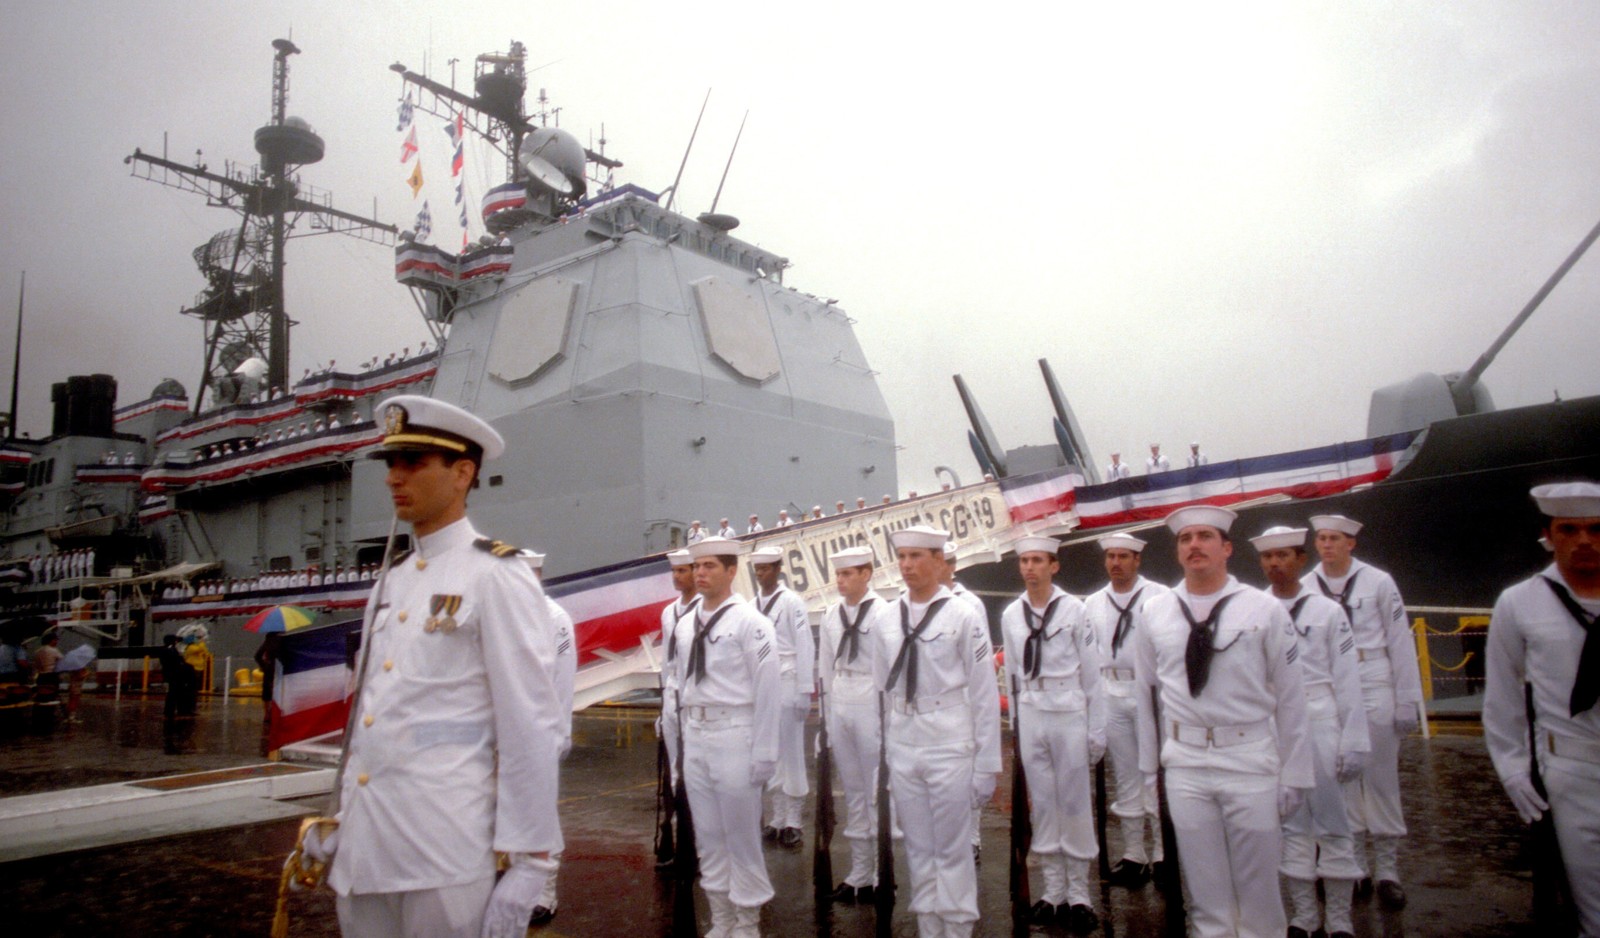 cg-49 uss vincennes ticonderoga class guided missile cruiser aegis us navy commissioning ceremony 50